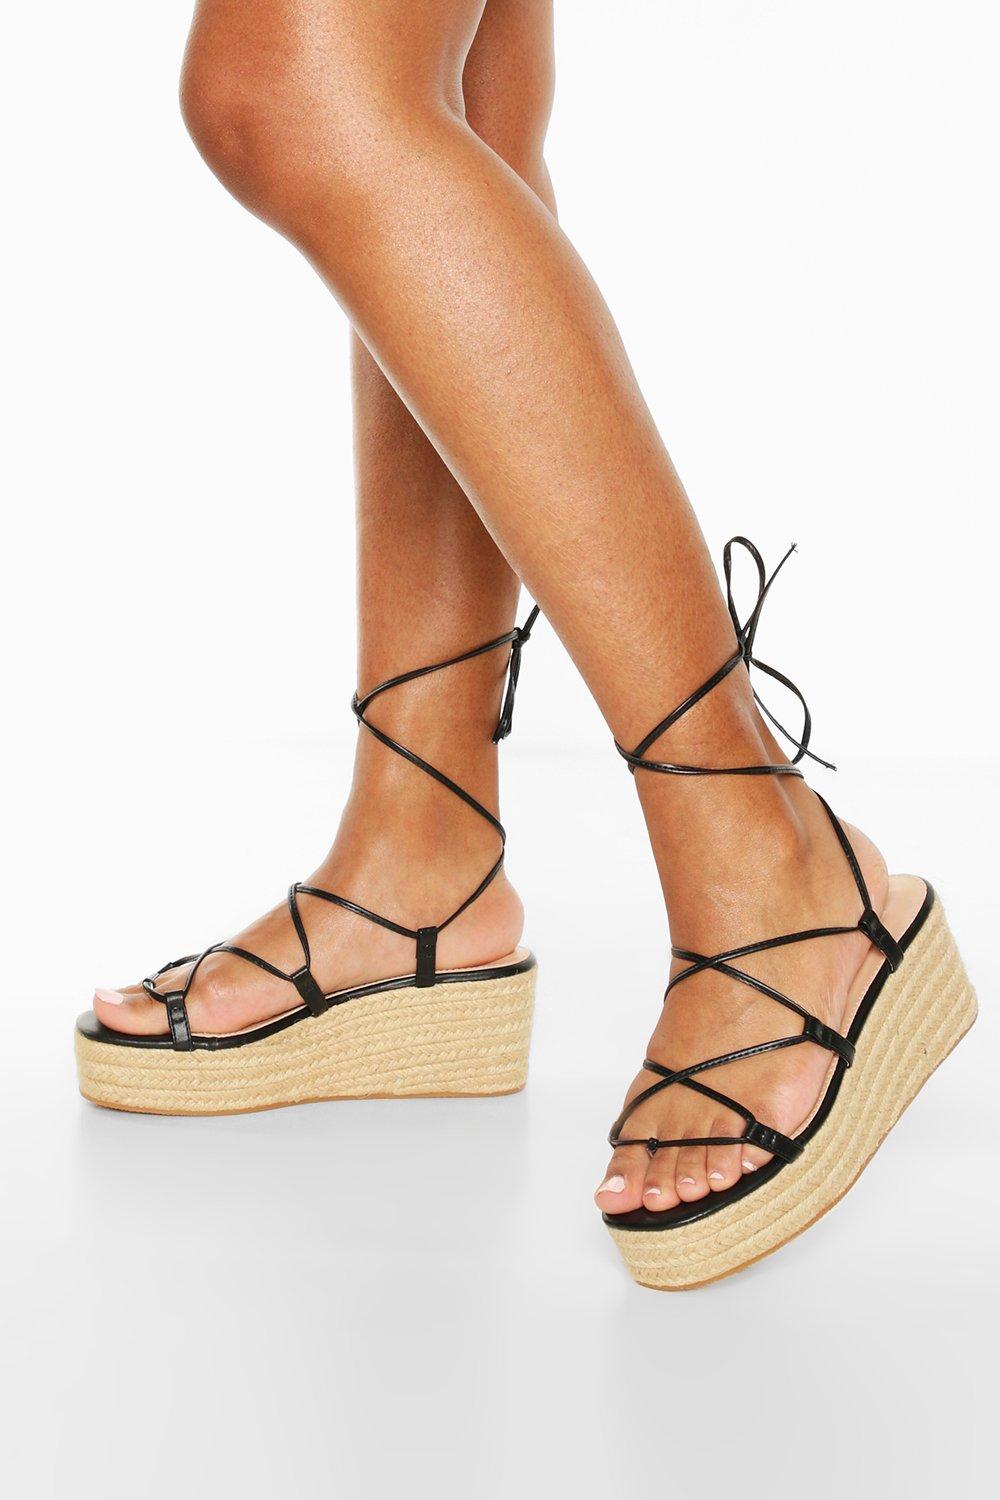 wrap up wedges